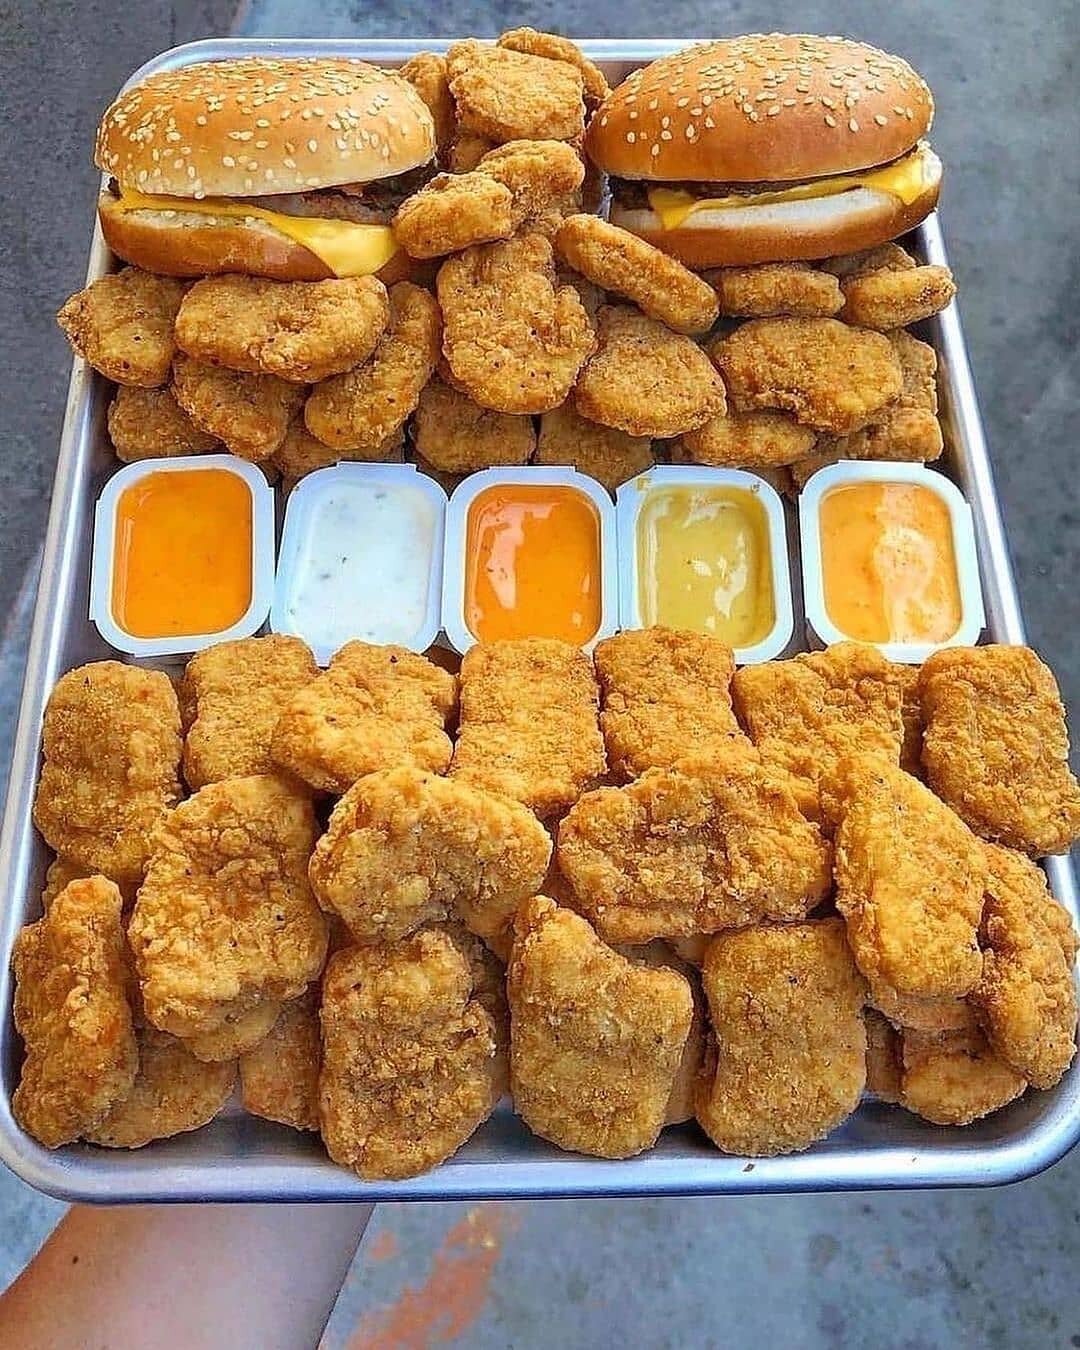 Not enough nuggs if you ask me... 🐣 @aframe24
.
.
&mdash;&mdash;&mdash;&mdash;&mdash;&mdash;&mdash;&mdash;&mdash;&mdash;&mdash;&mdash;&mdash;
Follow ➡️&nbsp;@foodinstabro&nbsp;🍕
Follow ➡️&nbsp;@foodinstabro&nbsp;🍟
Follow ➡️&nbsp;@foodinstabro&nbsp